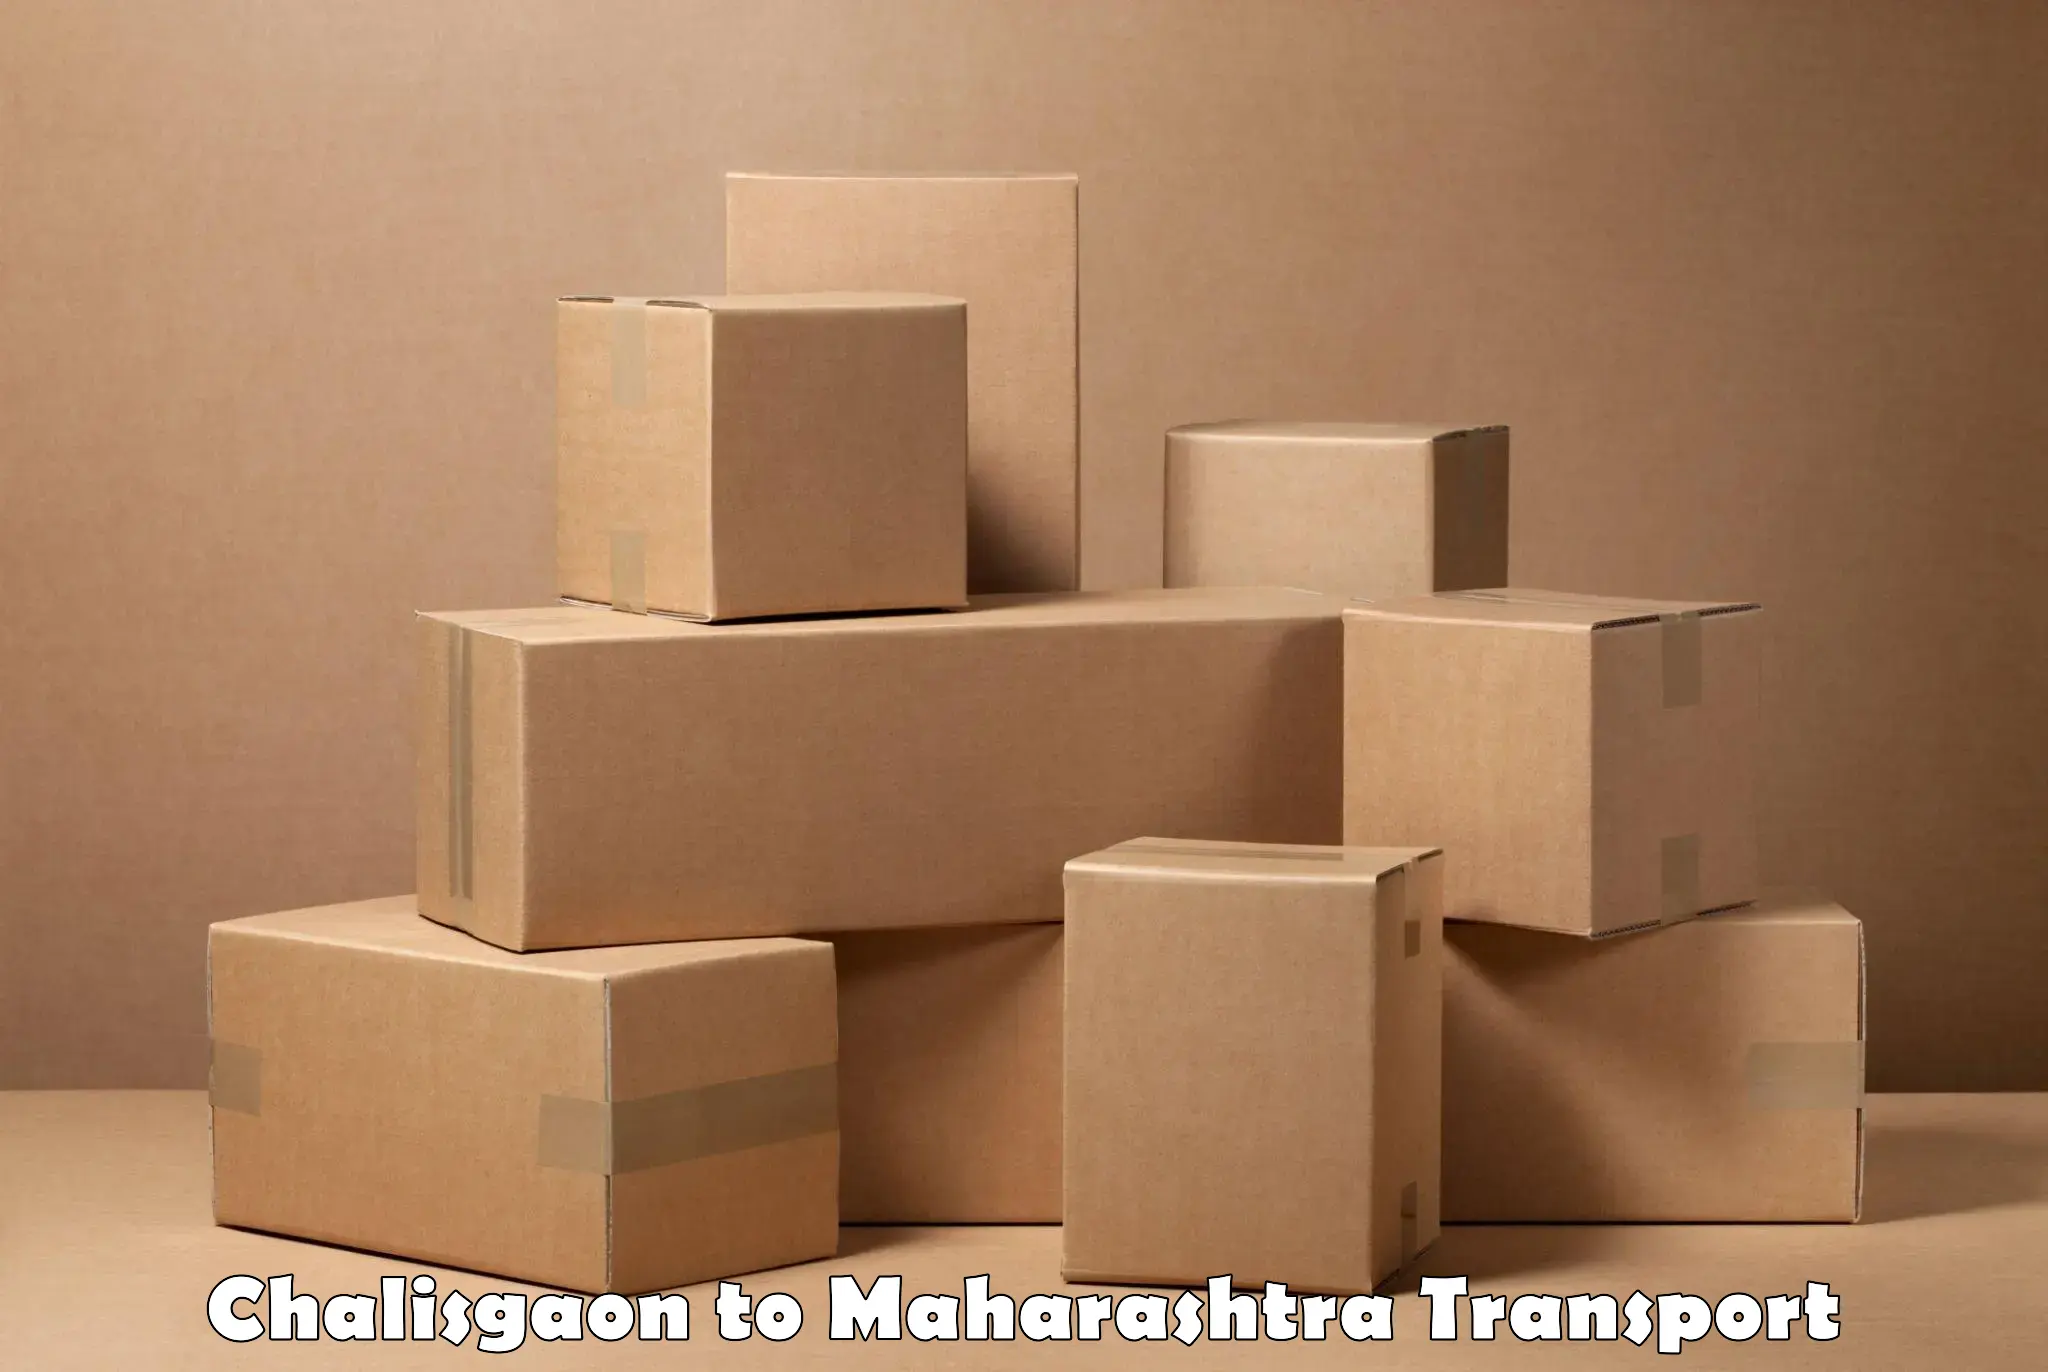 Goods delivery service Chalisgaon to Mahur